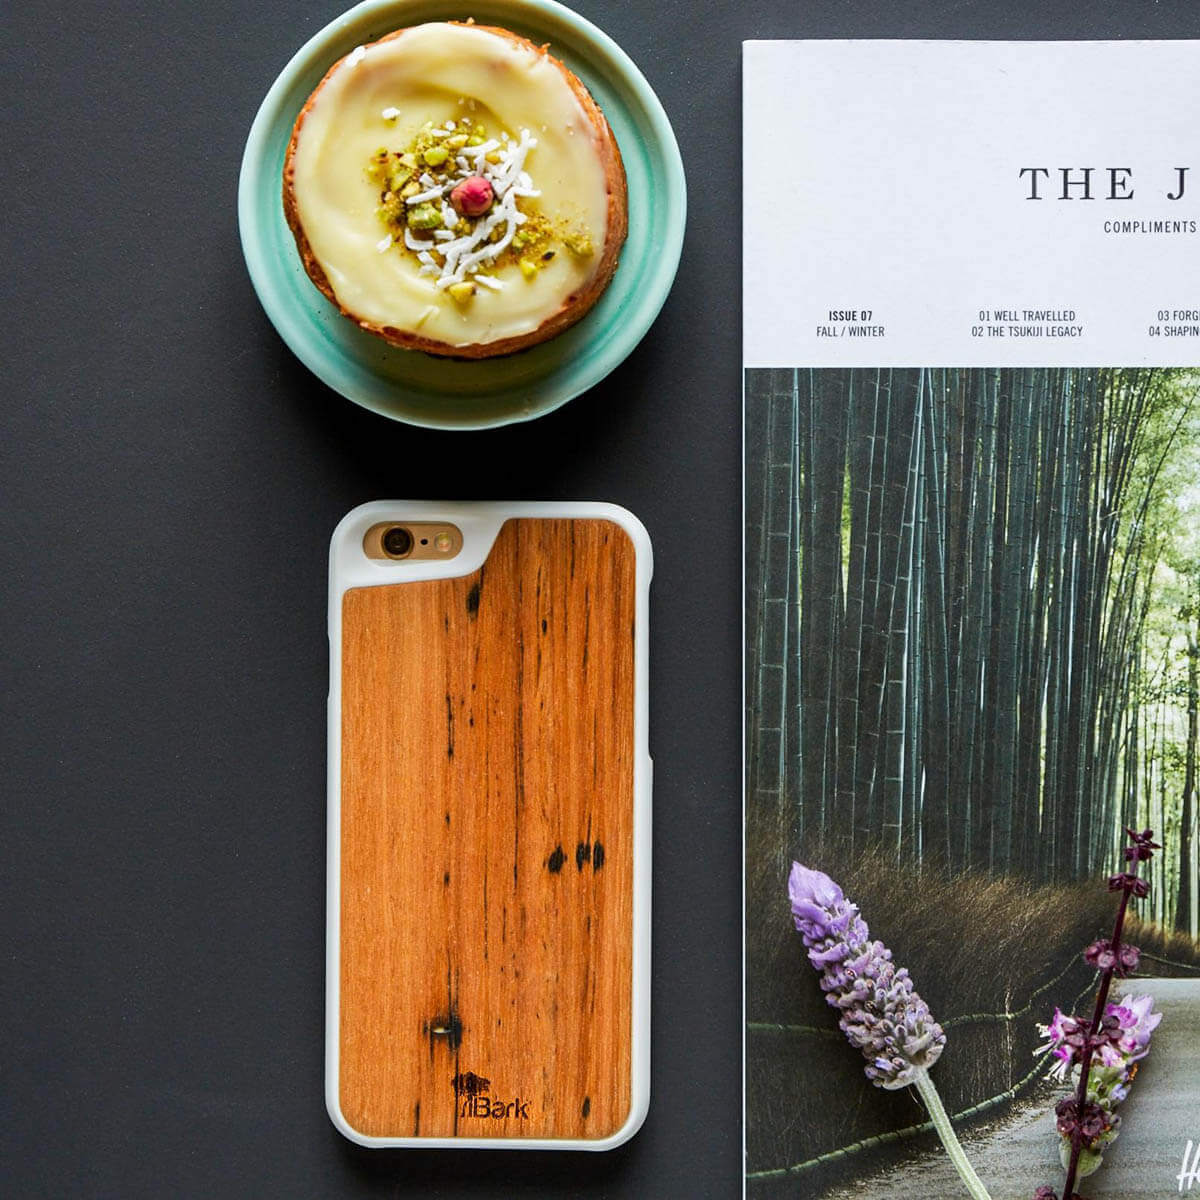 Cellphone with iBark wood cover on table with teacup and book